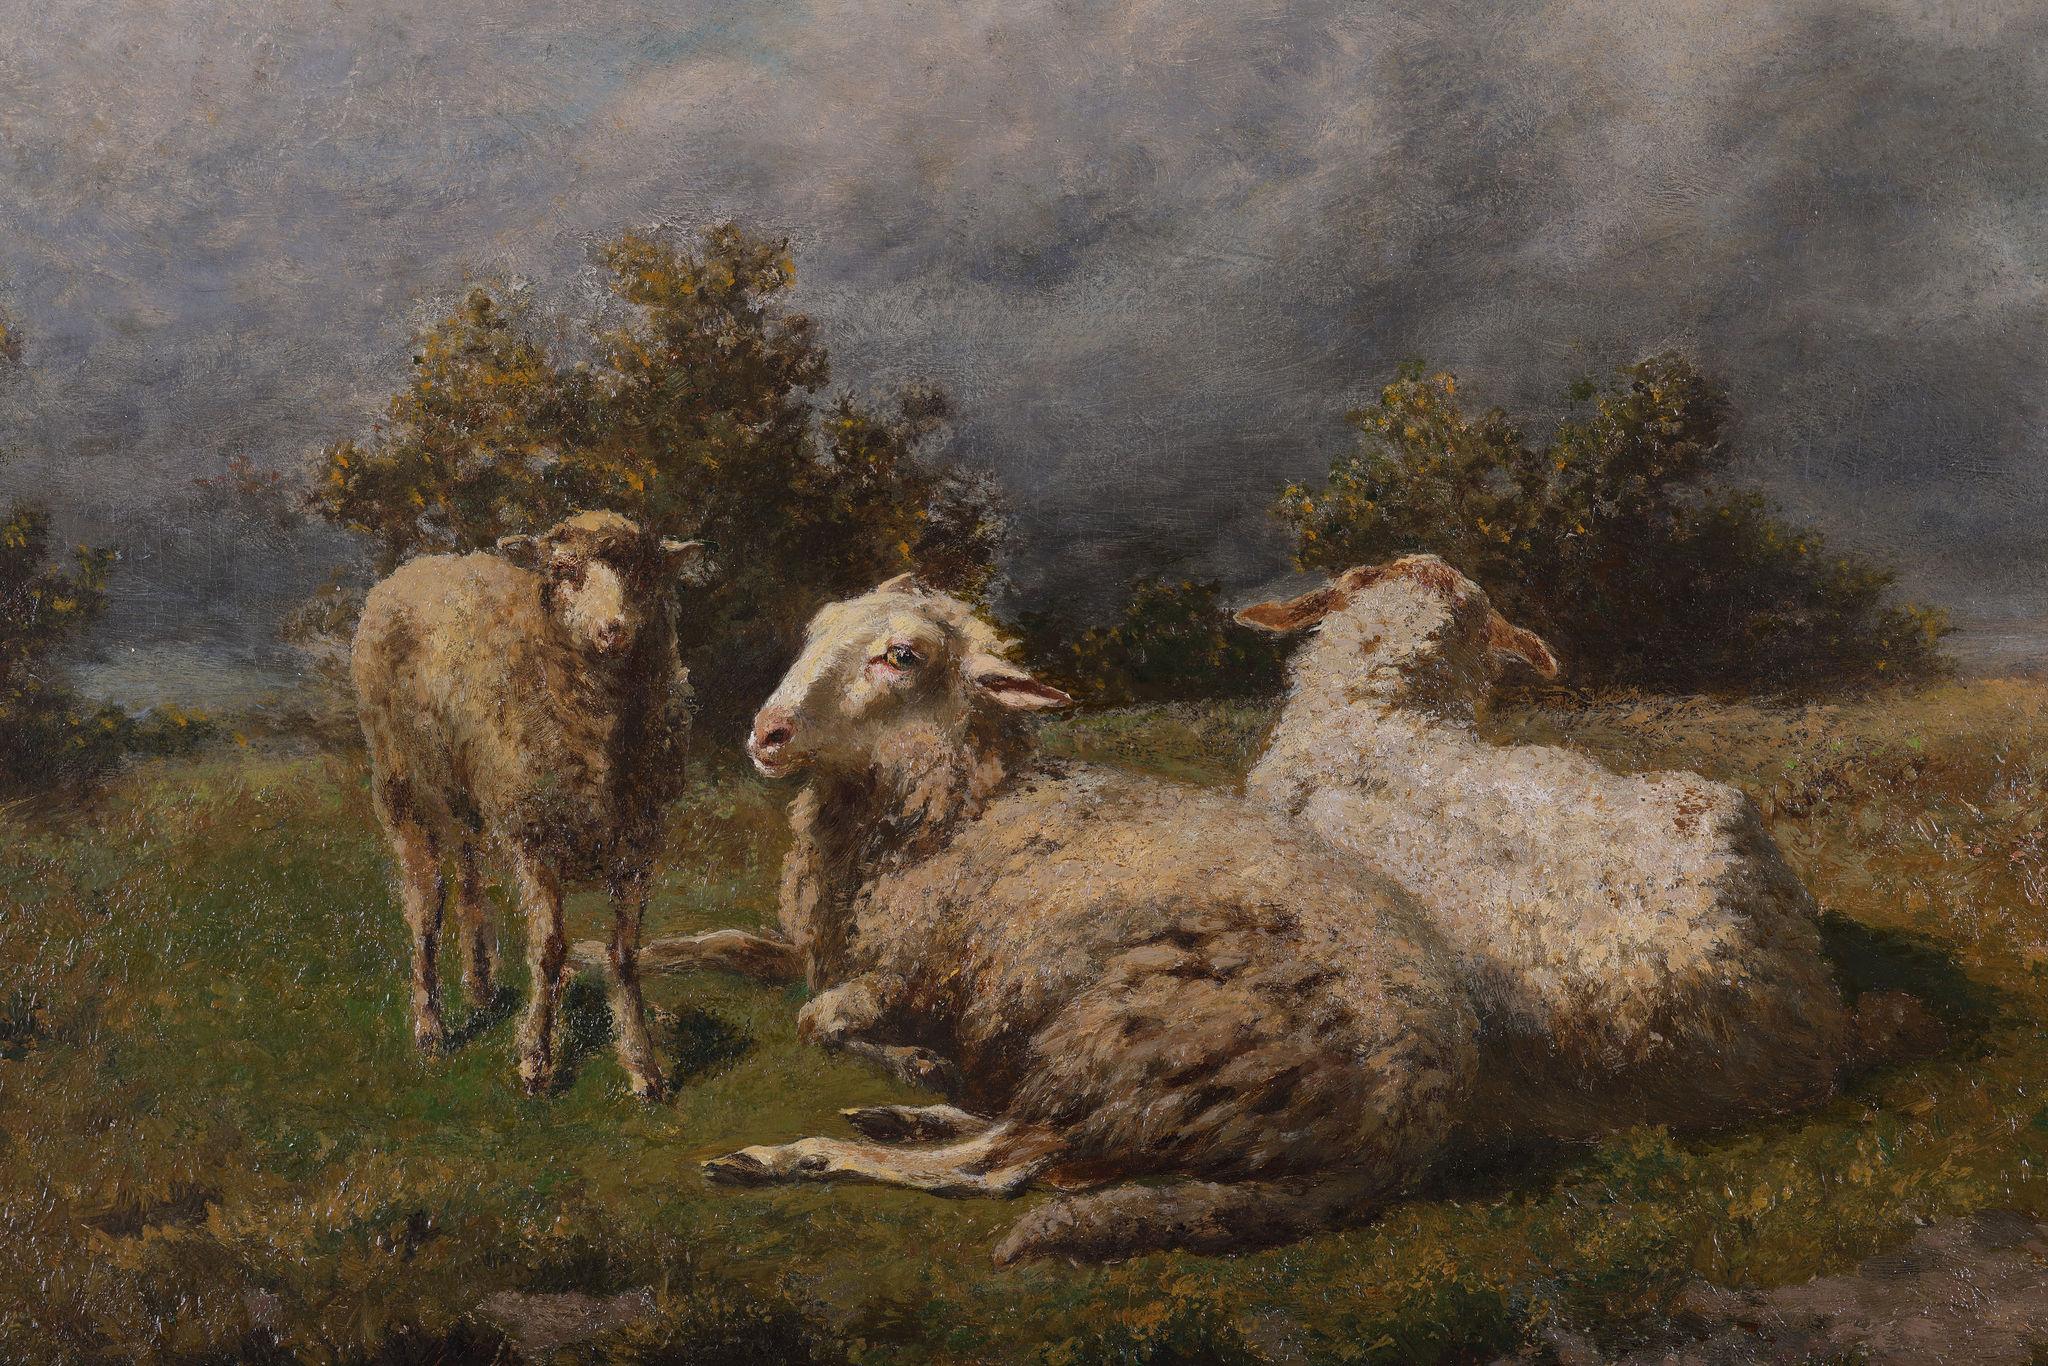 Sheep with their Lamb - Painting by Edouard Woutermaertens  